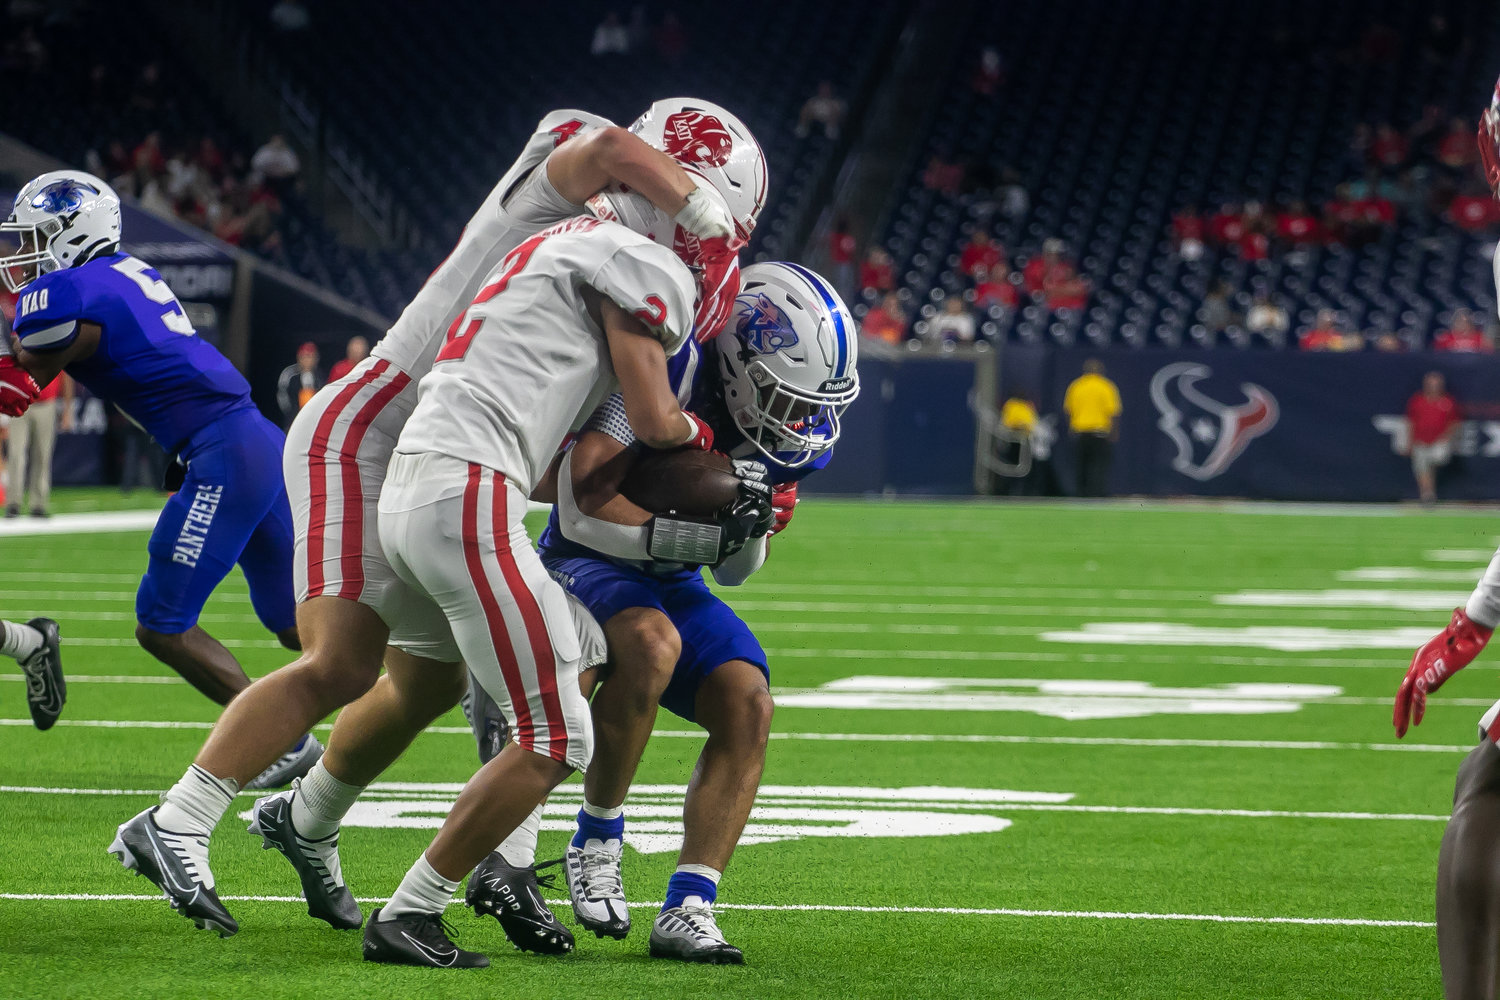 Katy players wrap up a C.E. King ballcarrier during Friday's Class 6A-Divison II Region III Final between Katy and C.E. King at NRG Stadium.